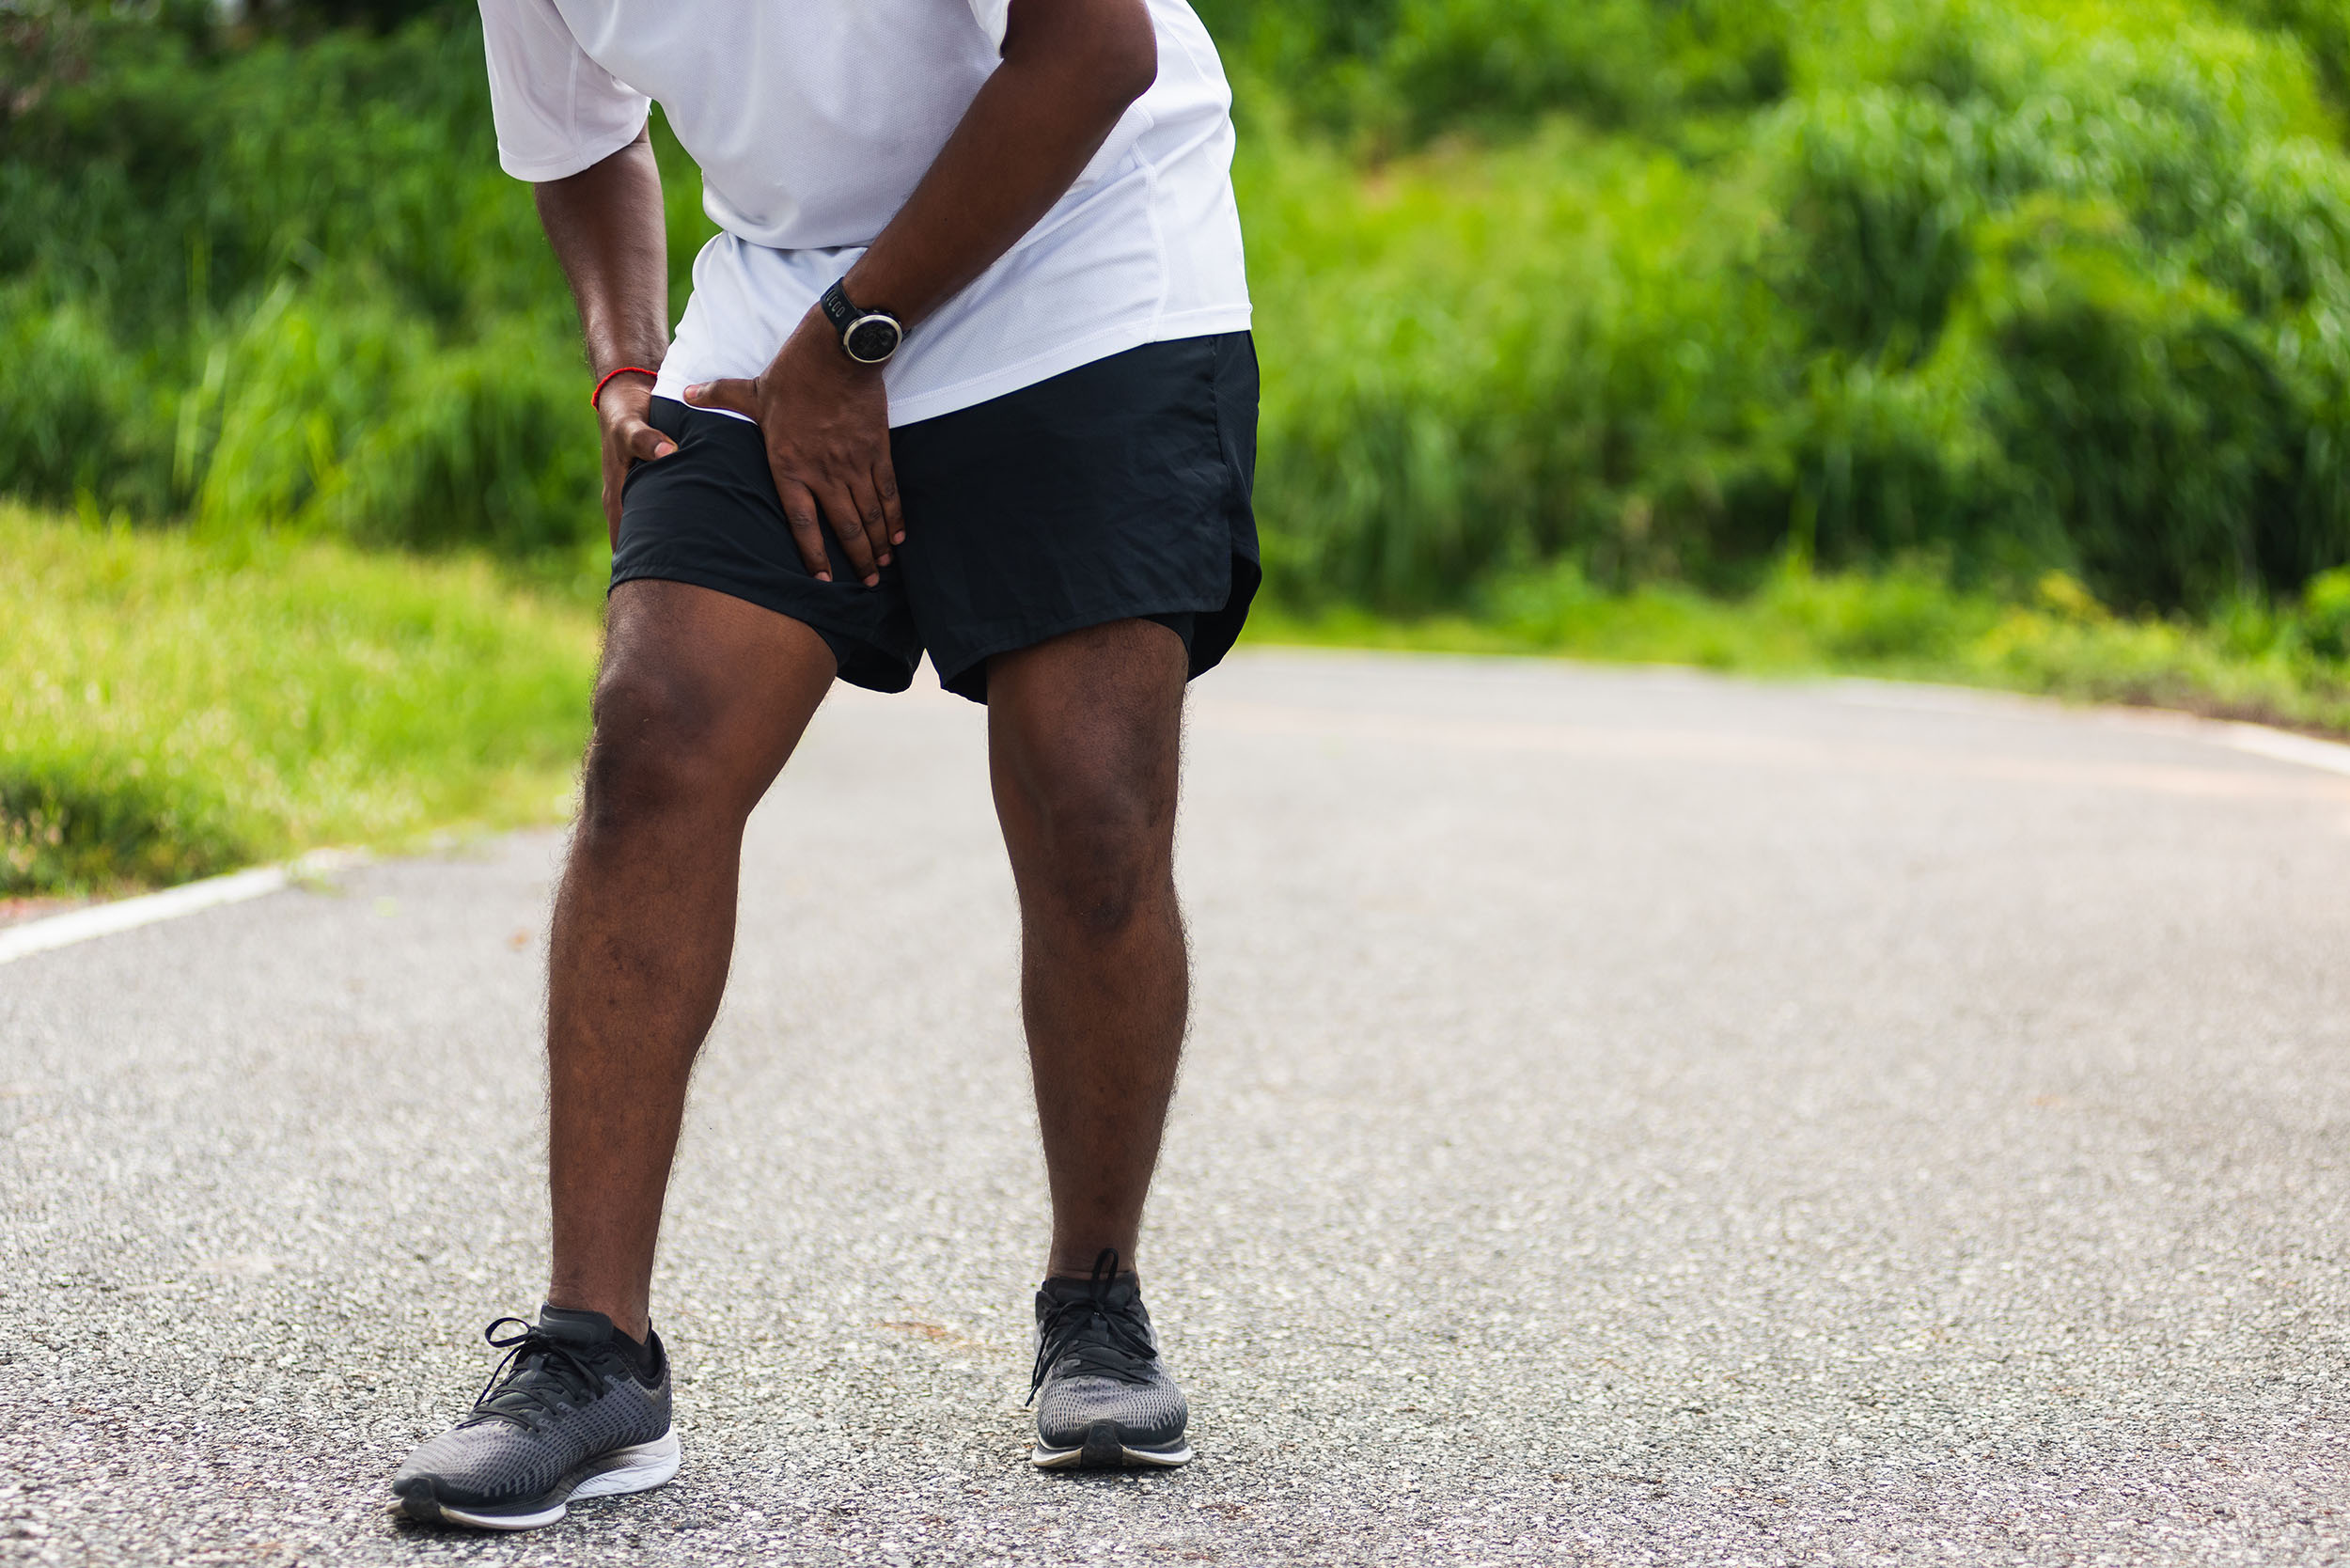 Men's Health: How to Prevent Chafing